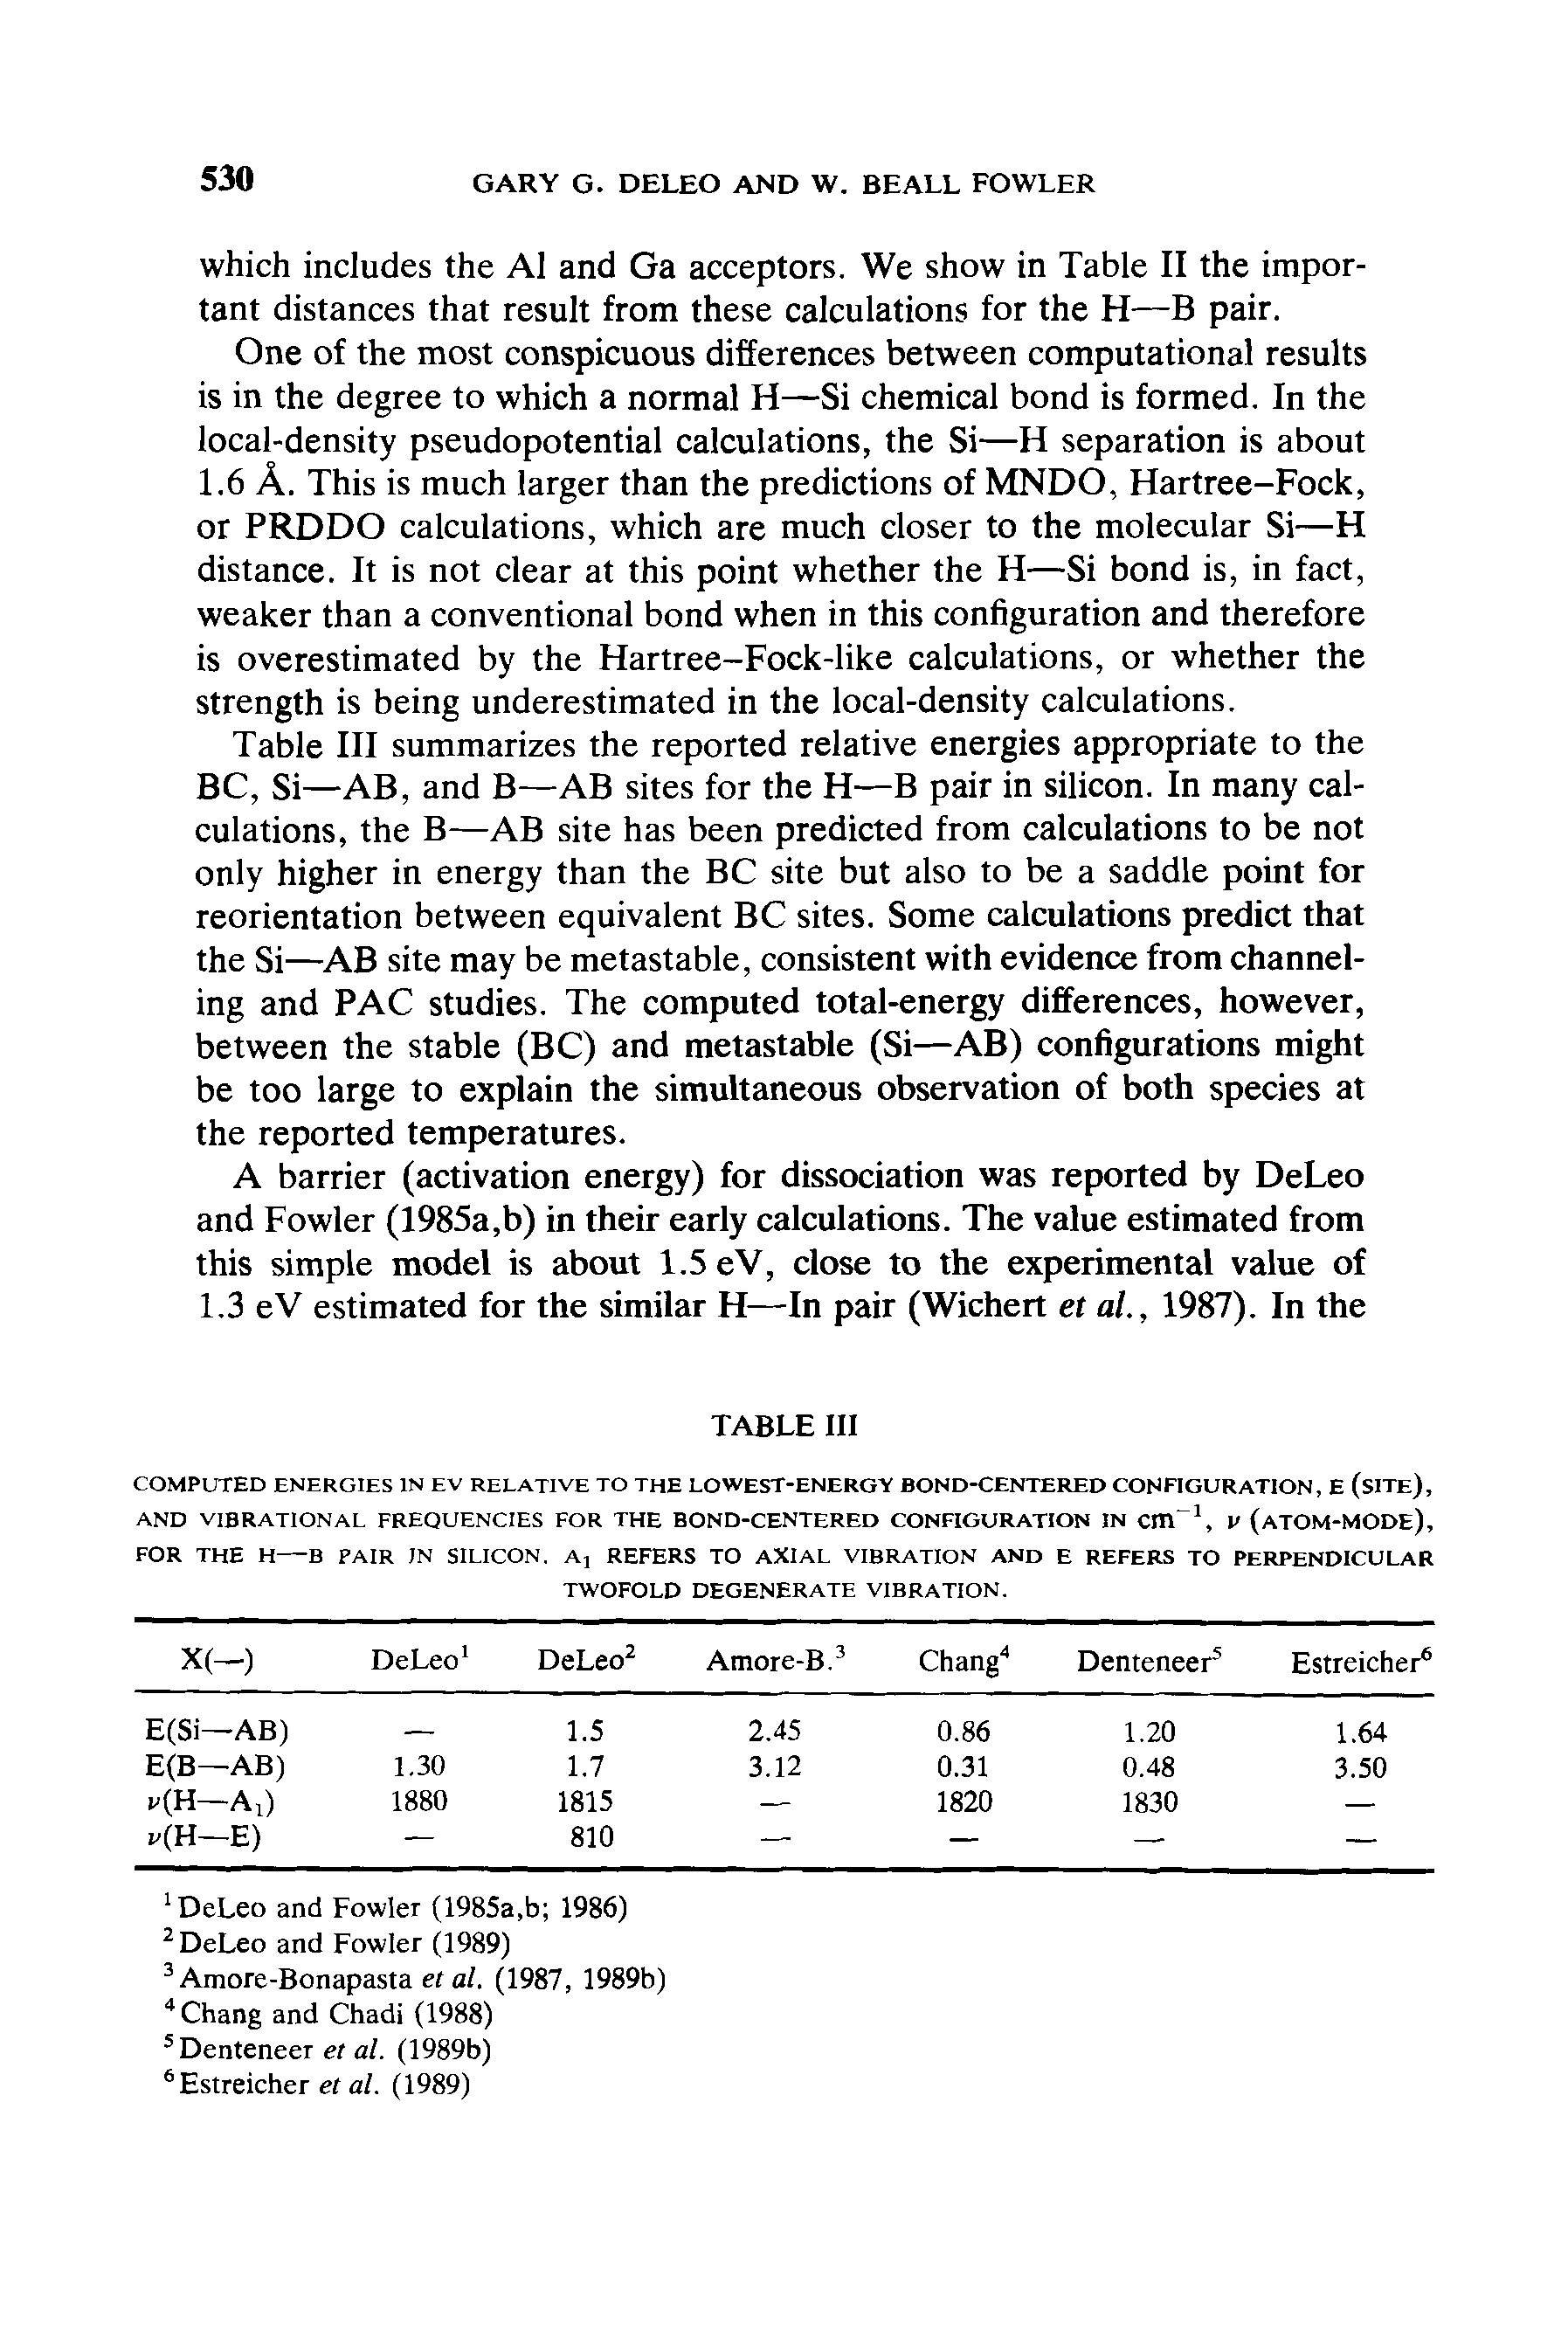 Table III summarizes the reported relative energies appropriate to the BC, Si—AB, and B—AB sites for the H—B pair in silicon. In many calculations, the B—AB site has been predicted from calculations to be not only higher in energy than the BC site but also to be a saddle point for reorientation between equivalent BC sites. Some calculations predict that the Si—AB site may be metastable, consistent with evidence from channeling and PAC studies. The computed total-energy differences, however, between the stable (BC) and metastable (Si—AB) configurations might be too large to explain the simultaneous observation of both species at the reported temperatures.